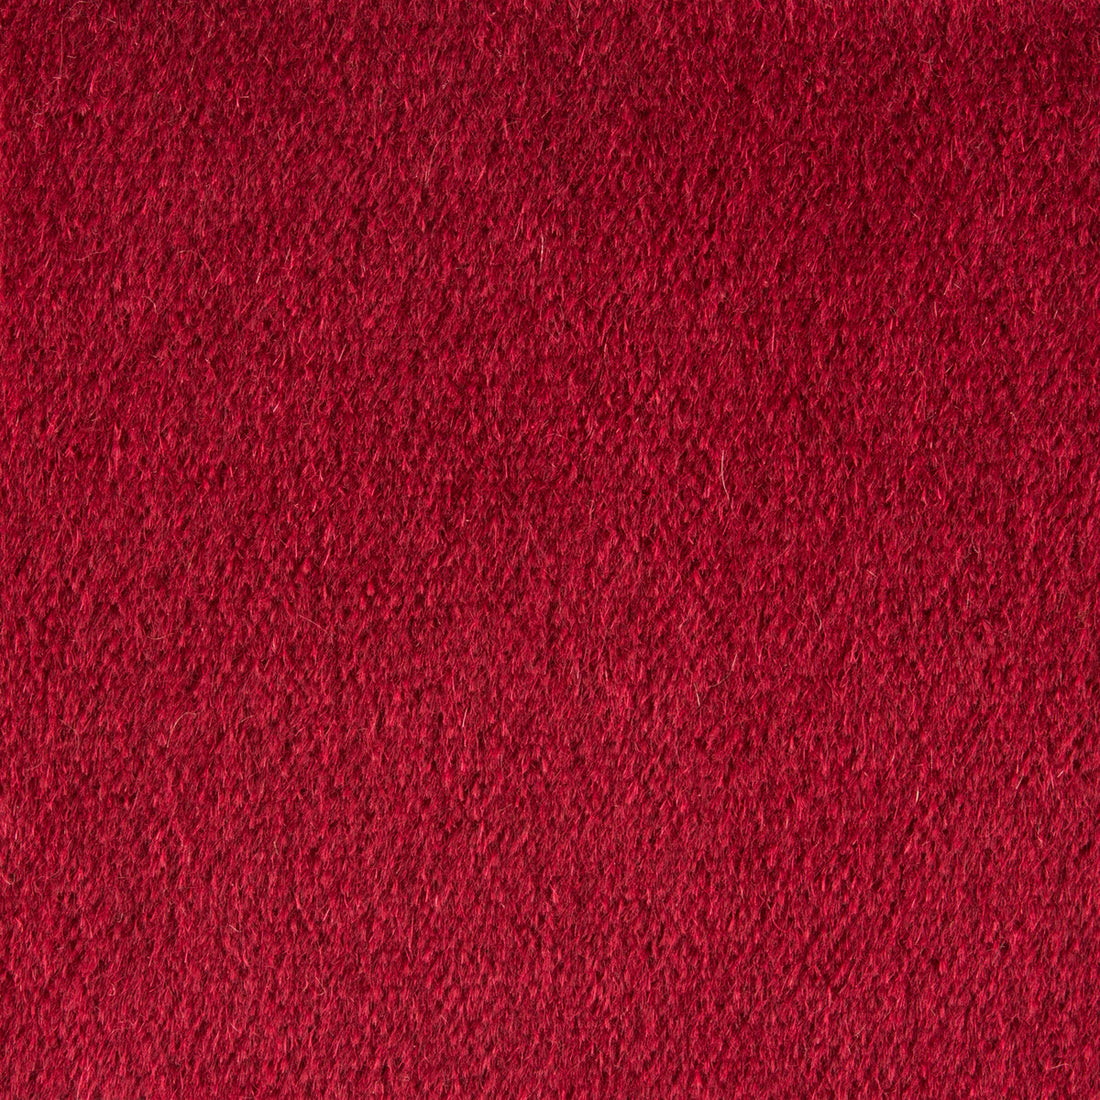 Plazzo Mohair fabric in cerise color - pattern 34259.140.0 - by Kravet Couture